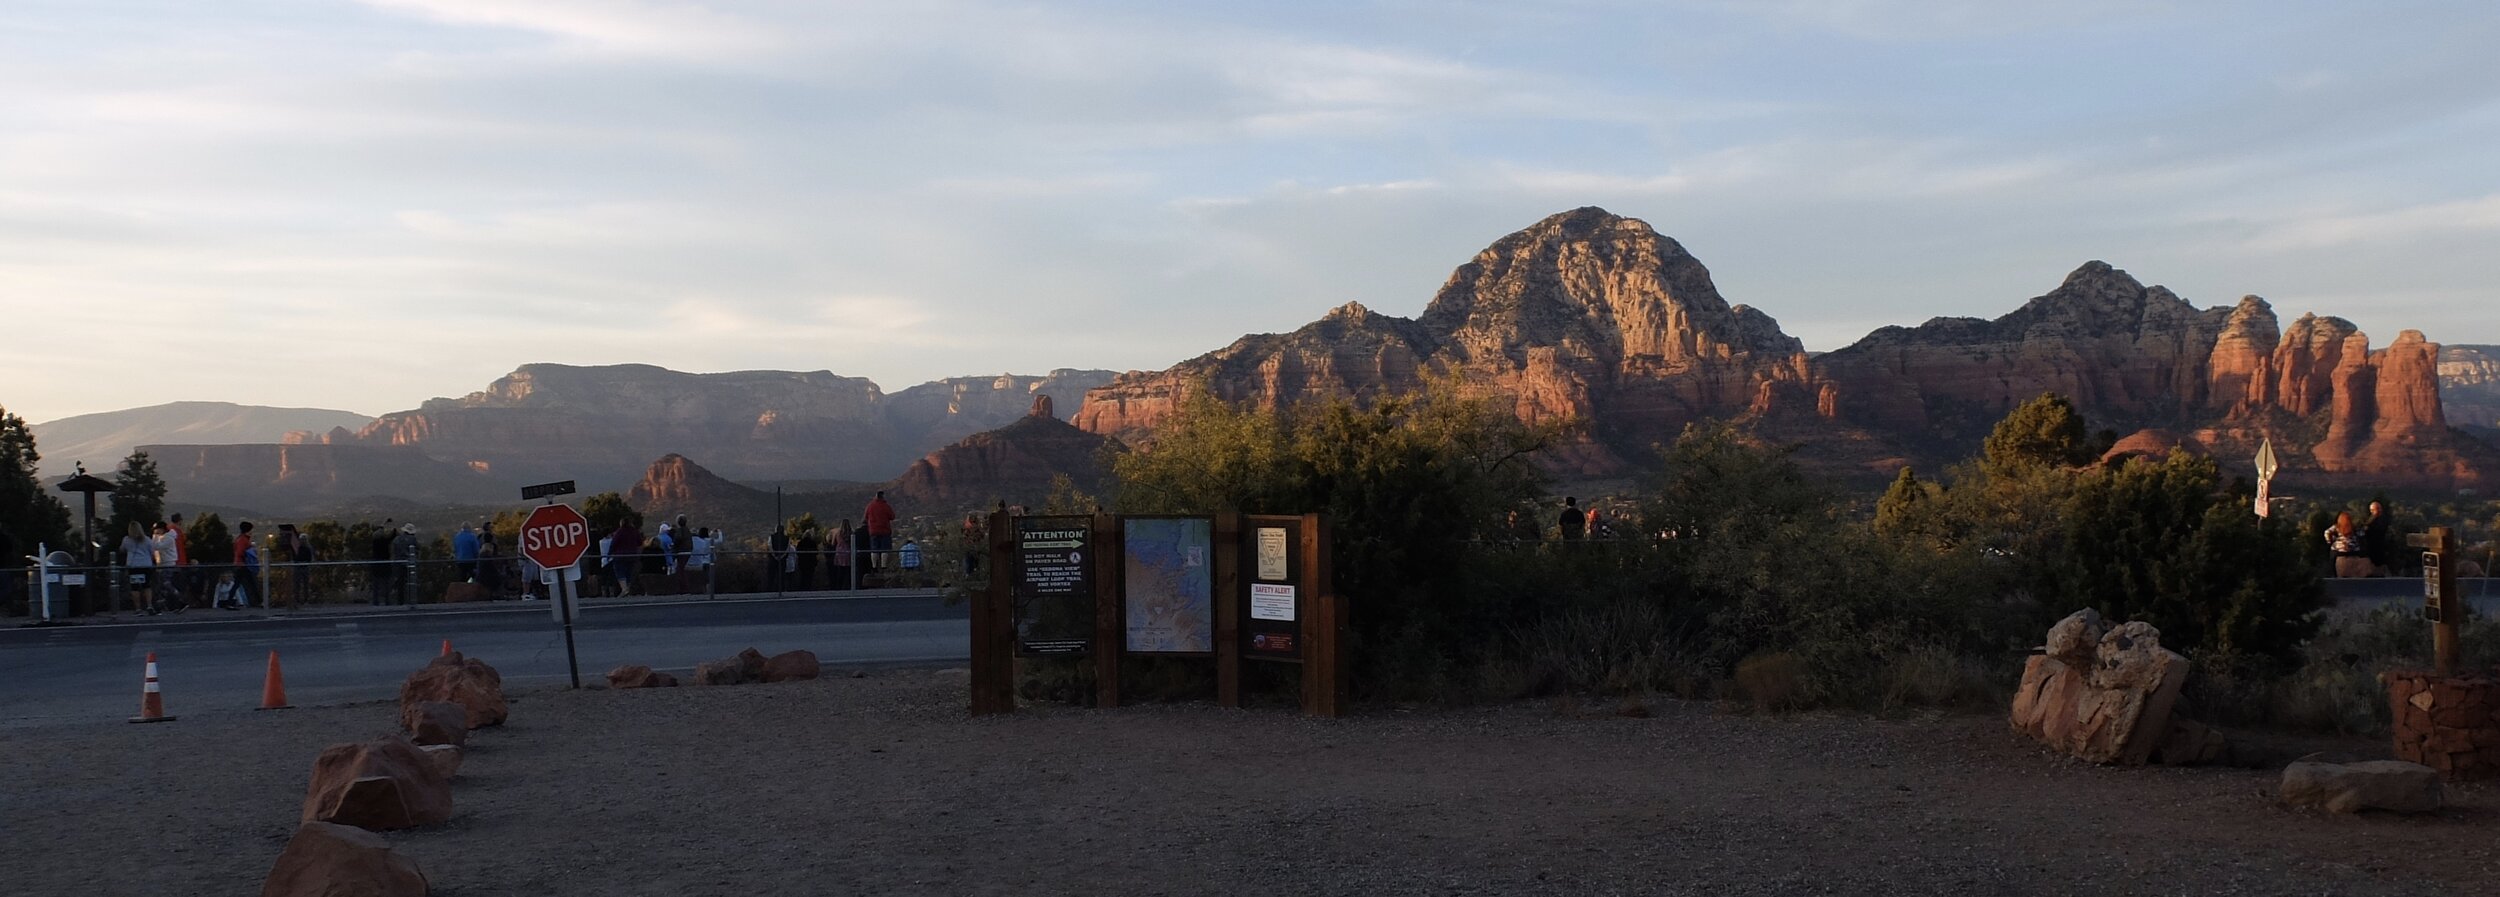 Folks congregating to watch the sunset on Sedona.